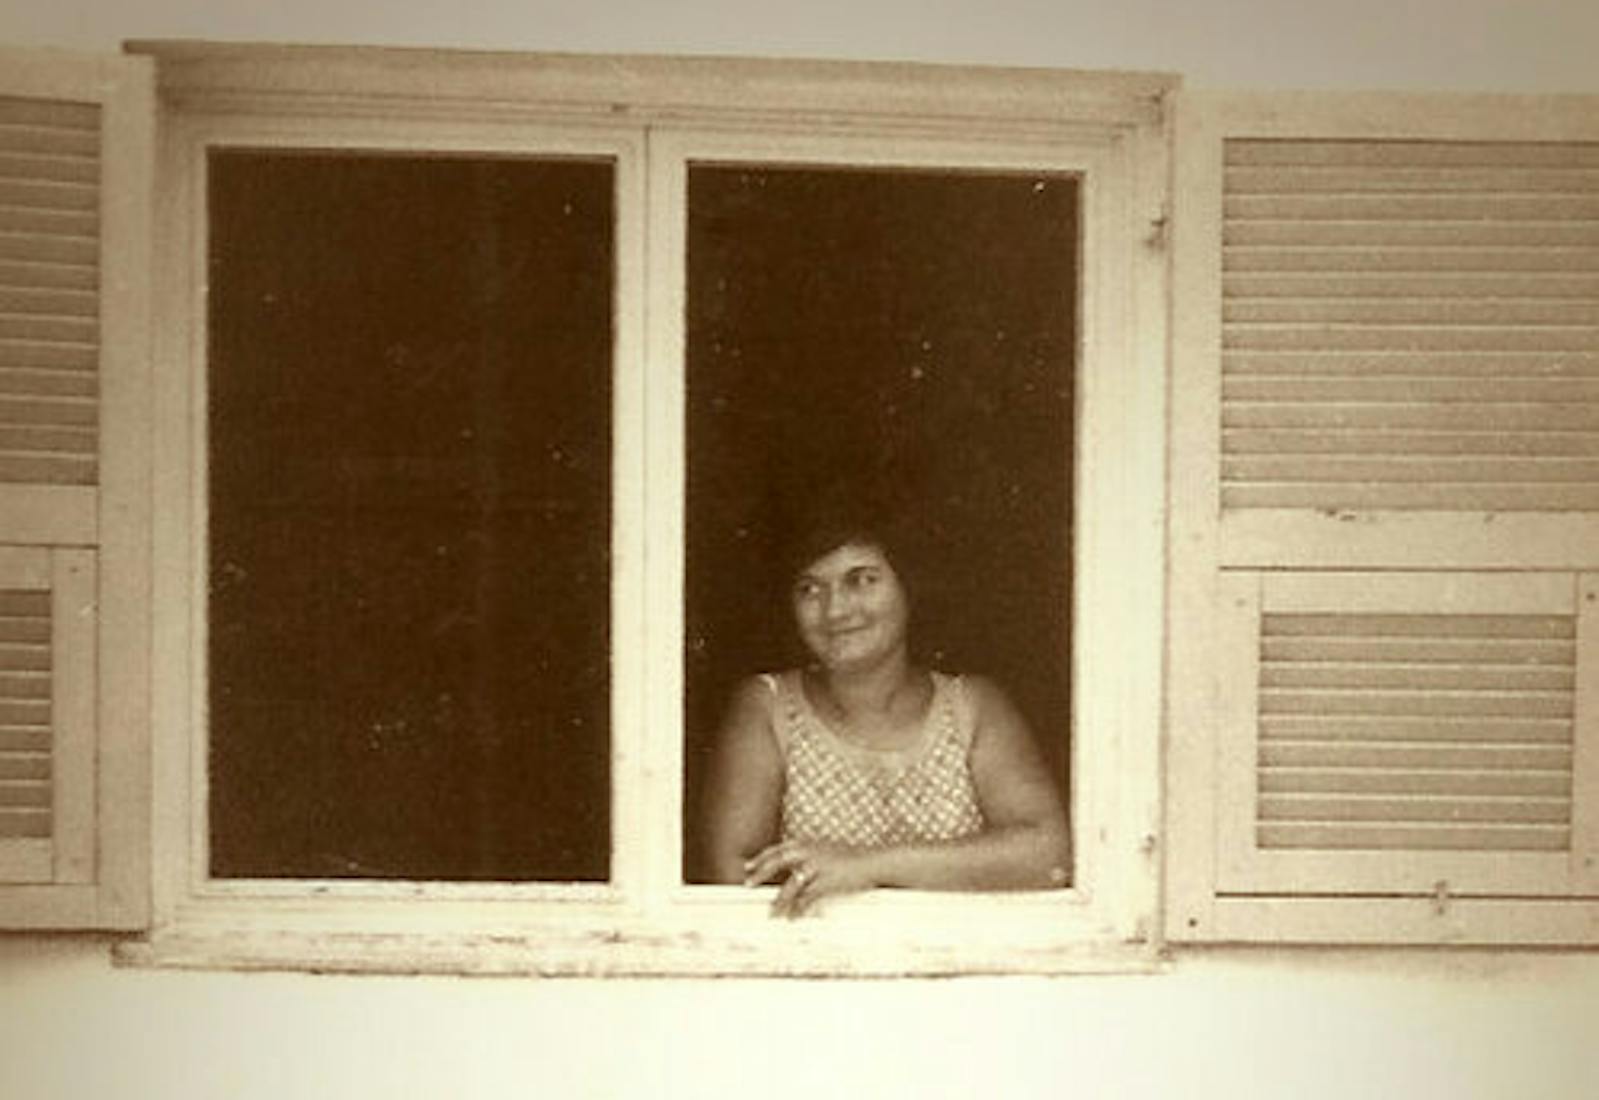 Uriel's mother, Pnina, in his childhood house in Lod in the 1970s.